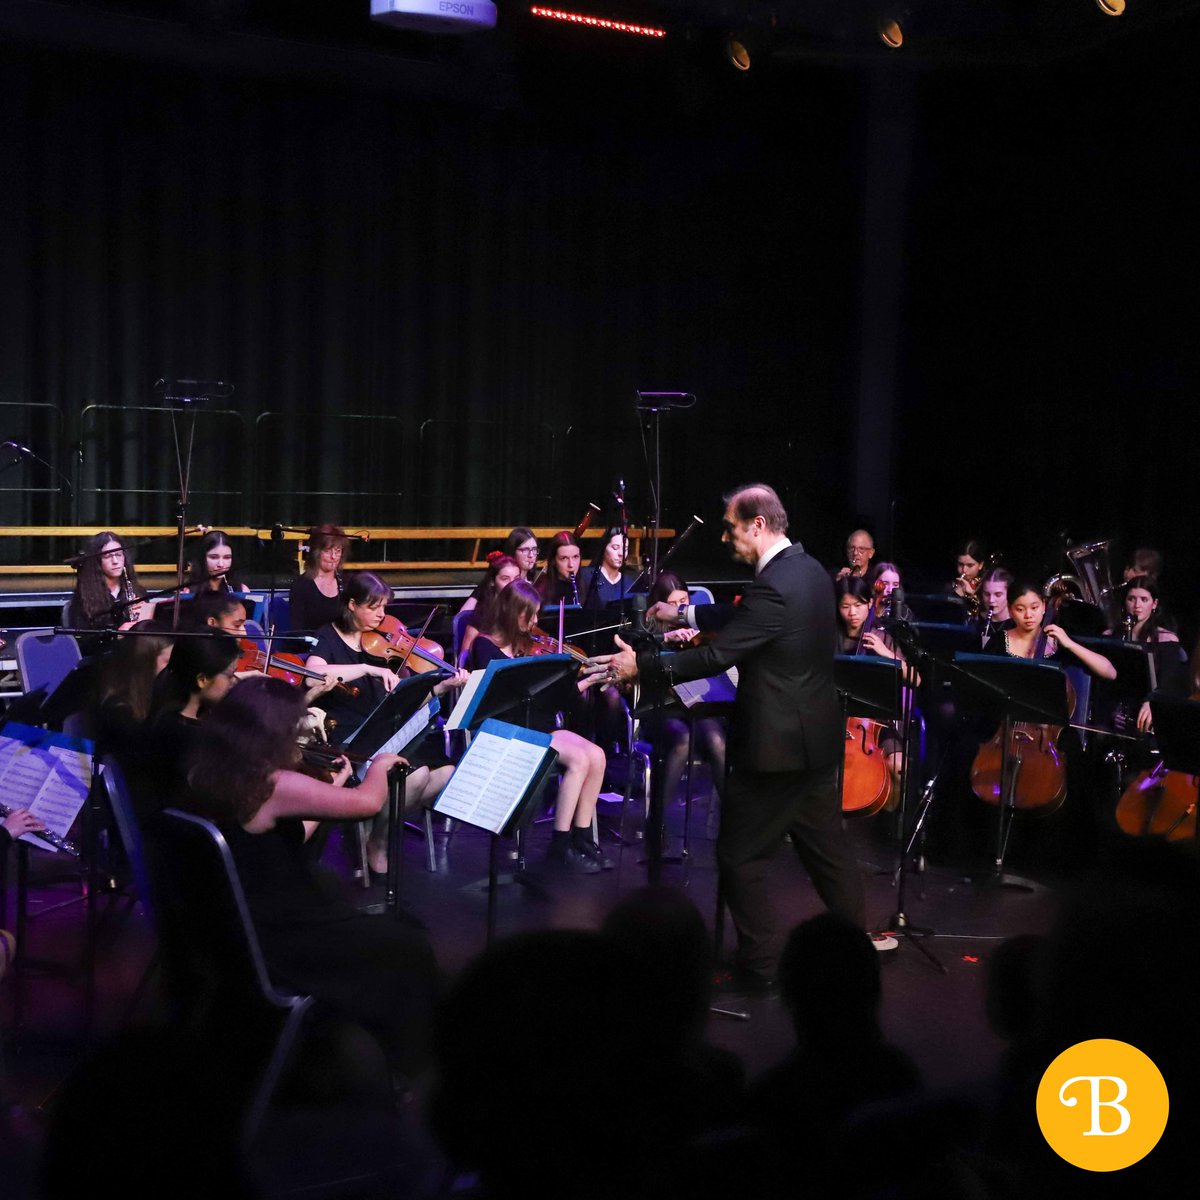 A round of applause for our incredible Senior and Sixth Form students who performed at the Spring concert last week! 🙌🏼 We were left speechless by the sheer amount of talent and dedication on display. 🎶